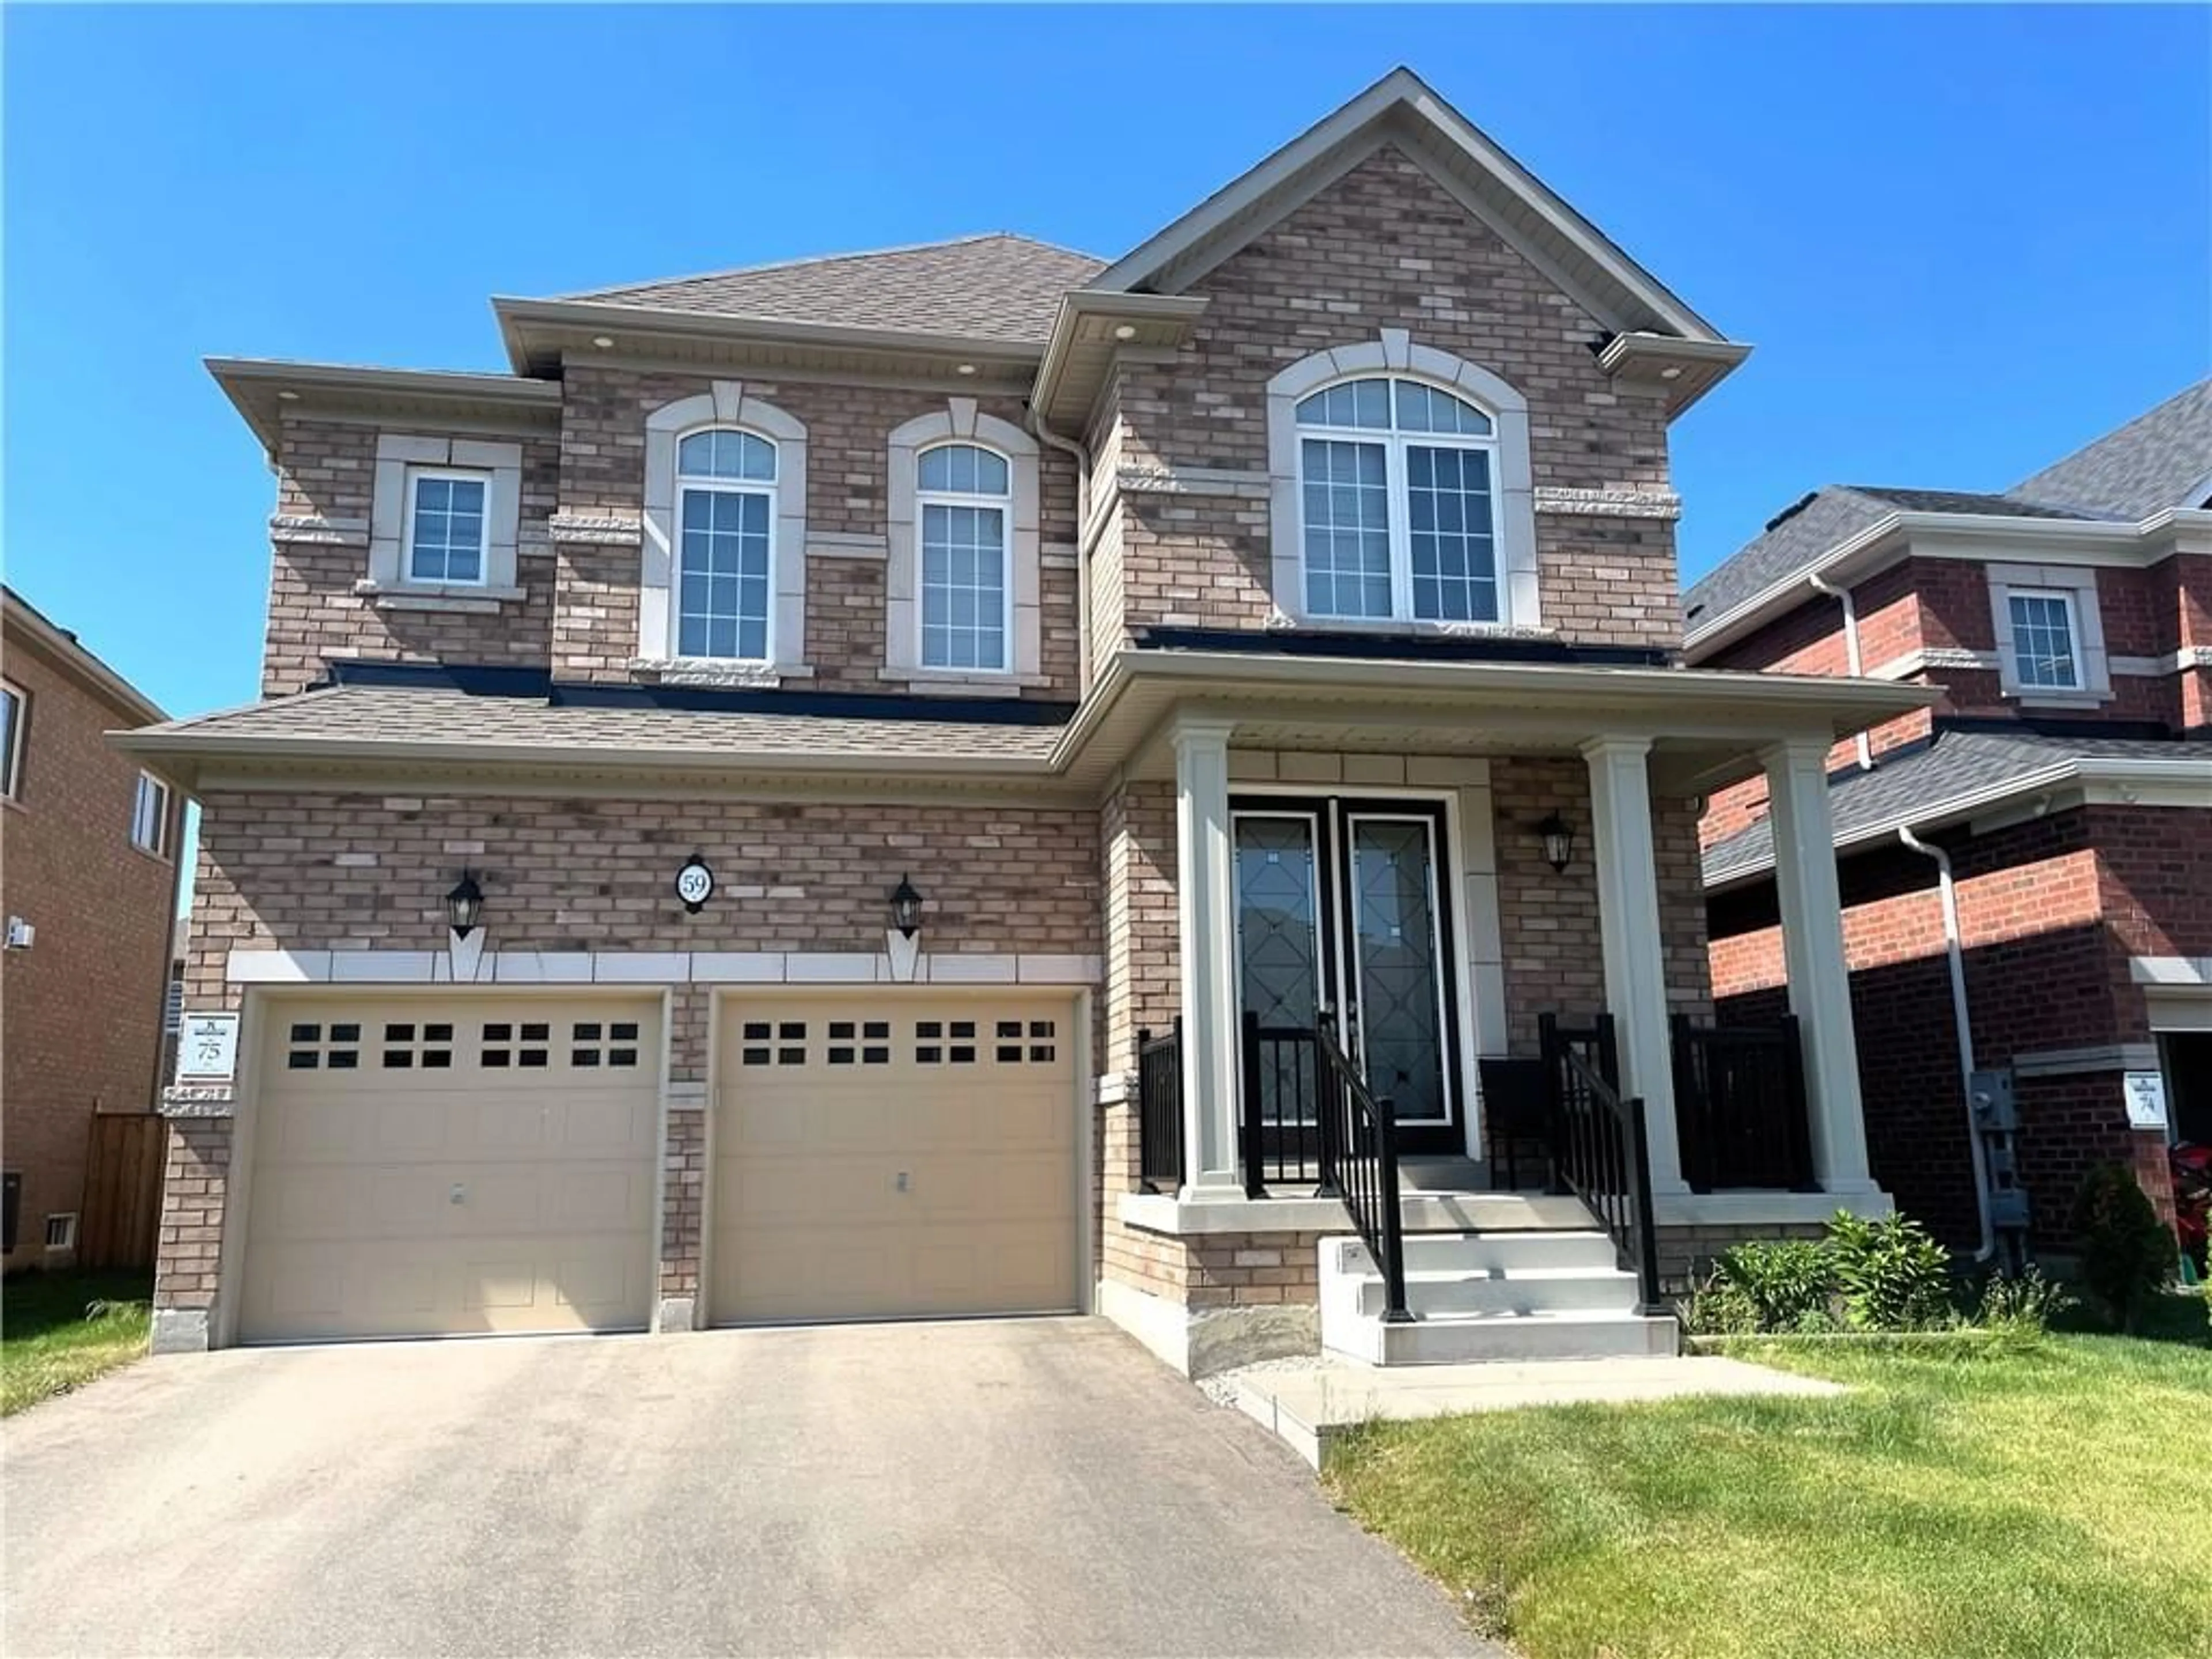 Home with brick exterior material for 59 Findlay Dr, Ancaster Ontario L9K 0H5